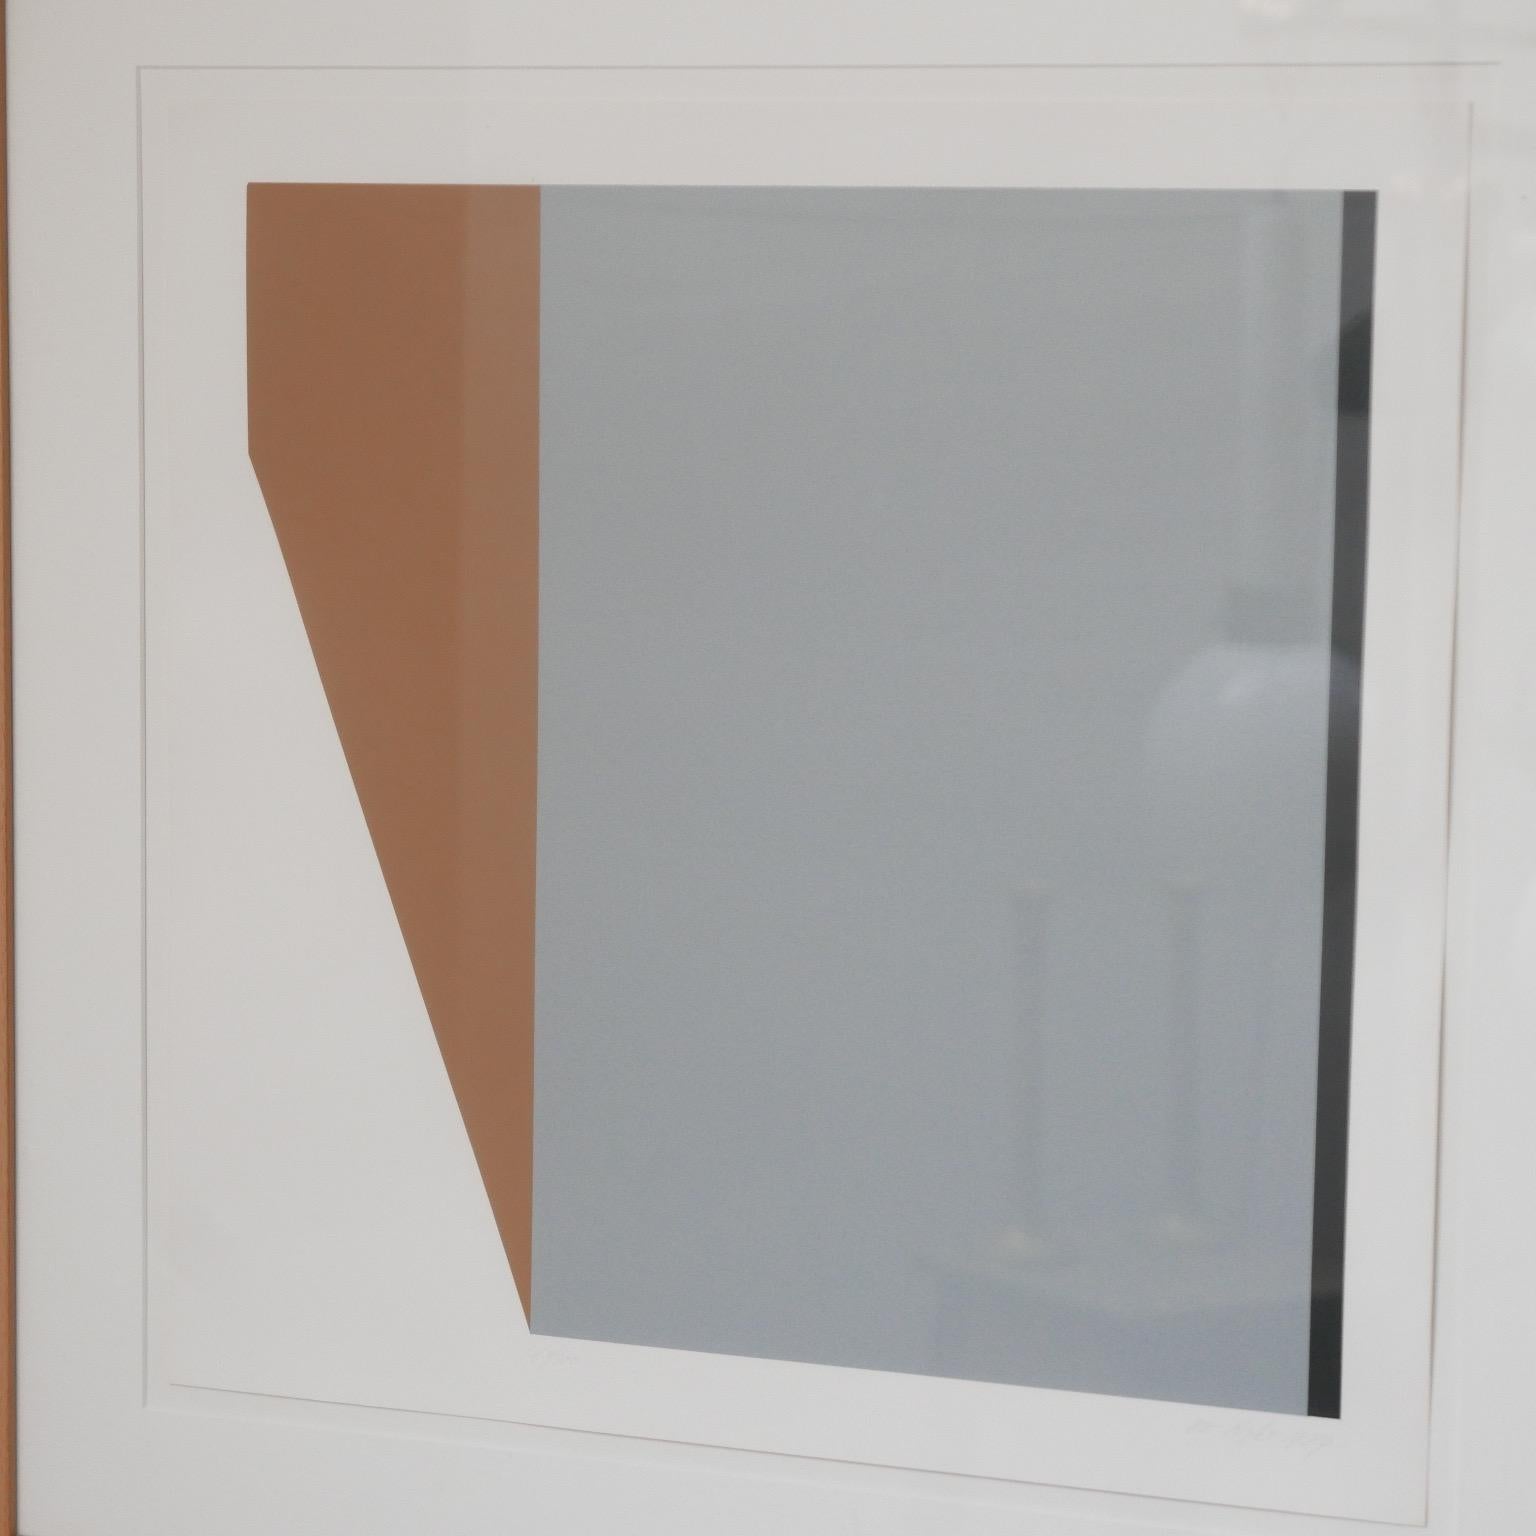 Geometric Late 20th Century Dutch Framed Artwork In Excellent Condition For Sale In London, GB